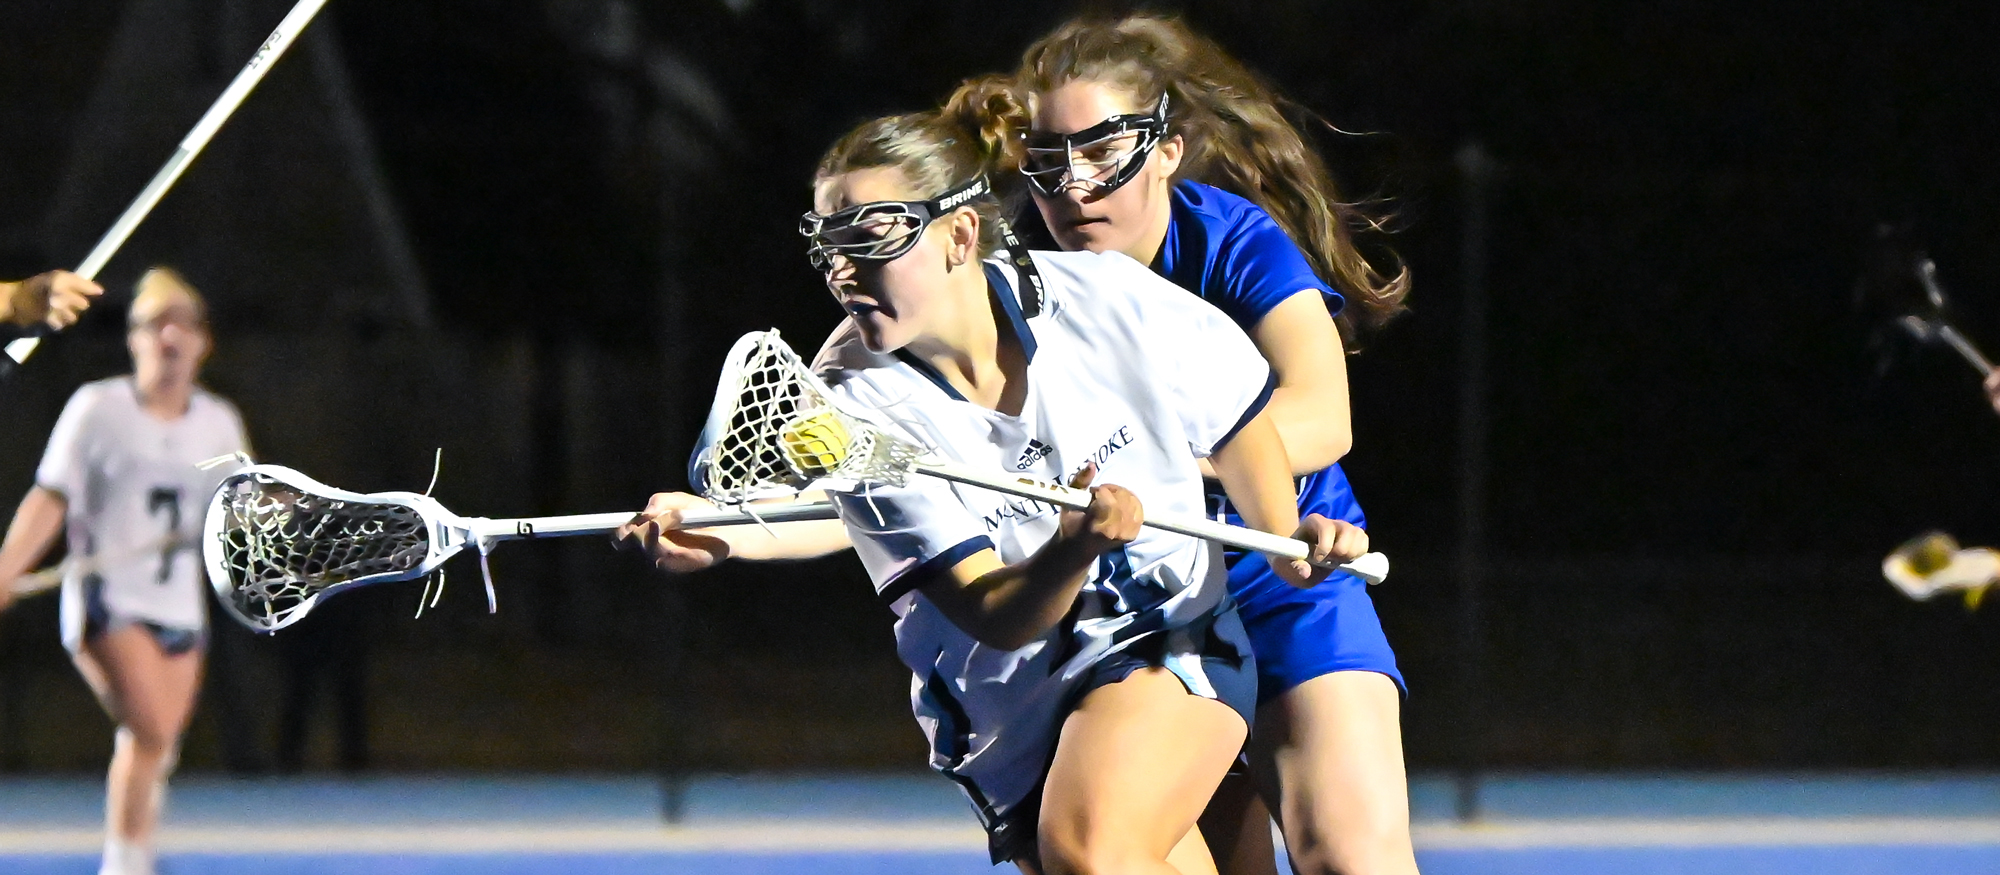 Emi Bisson scored a career-high eight goals, the most by any player in a NEWMAC game this season, in Mount Holyoke's 19-18 overtime loss to Emerson on April 15, 2024. (RJB Sports file photo)